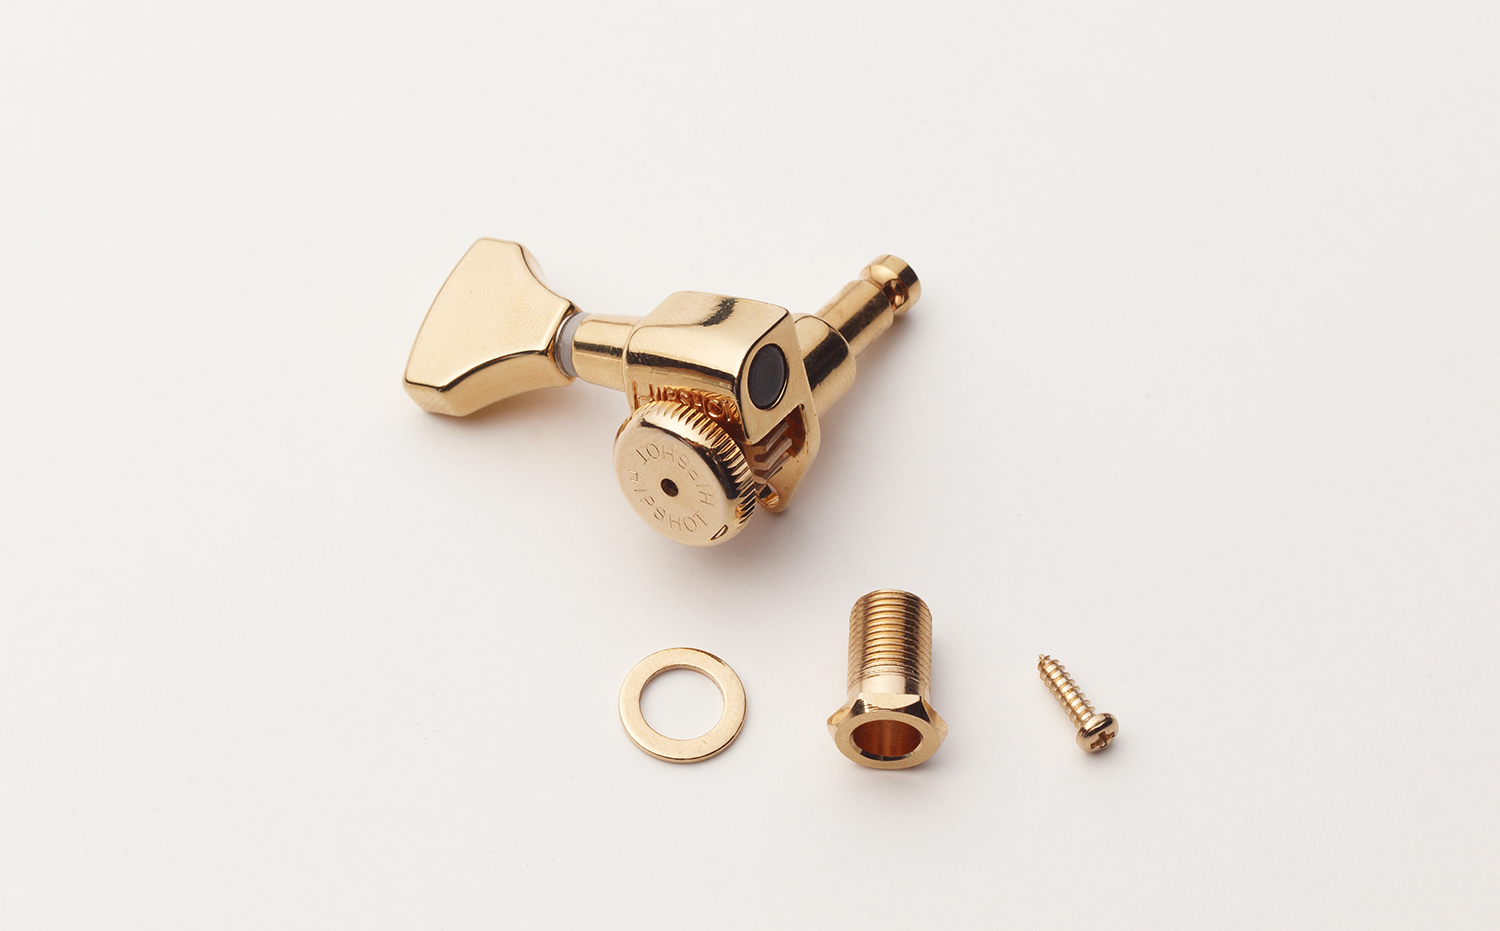 Hipshot Grip-Lock Open Guitar Tuning Machines - Treble Side (Right) - Gold